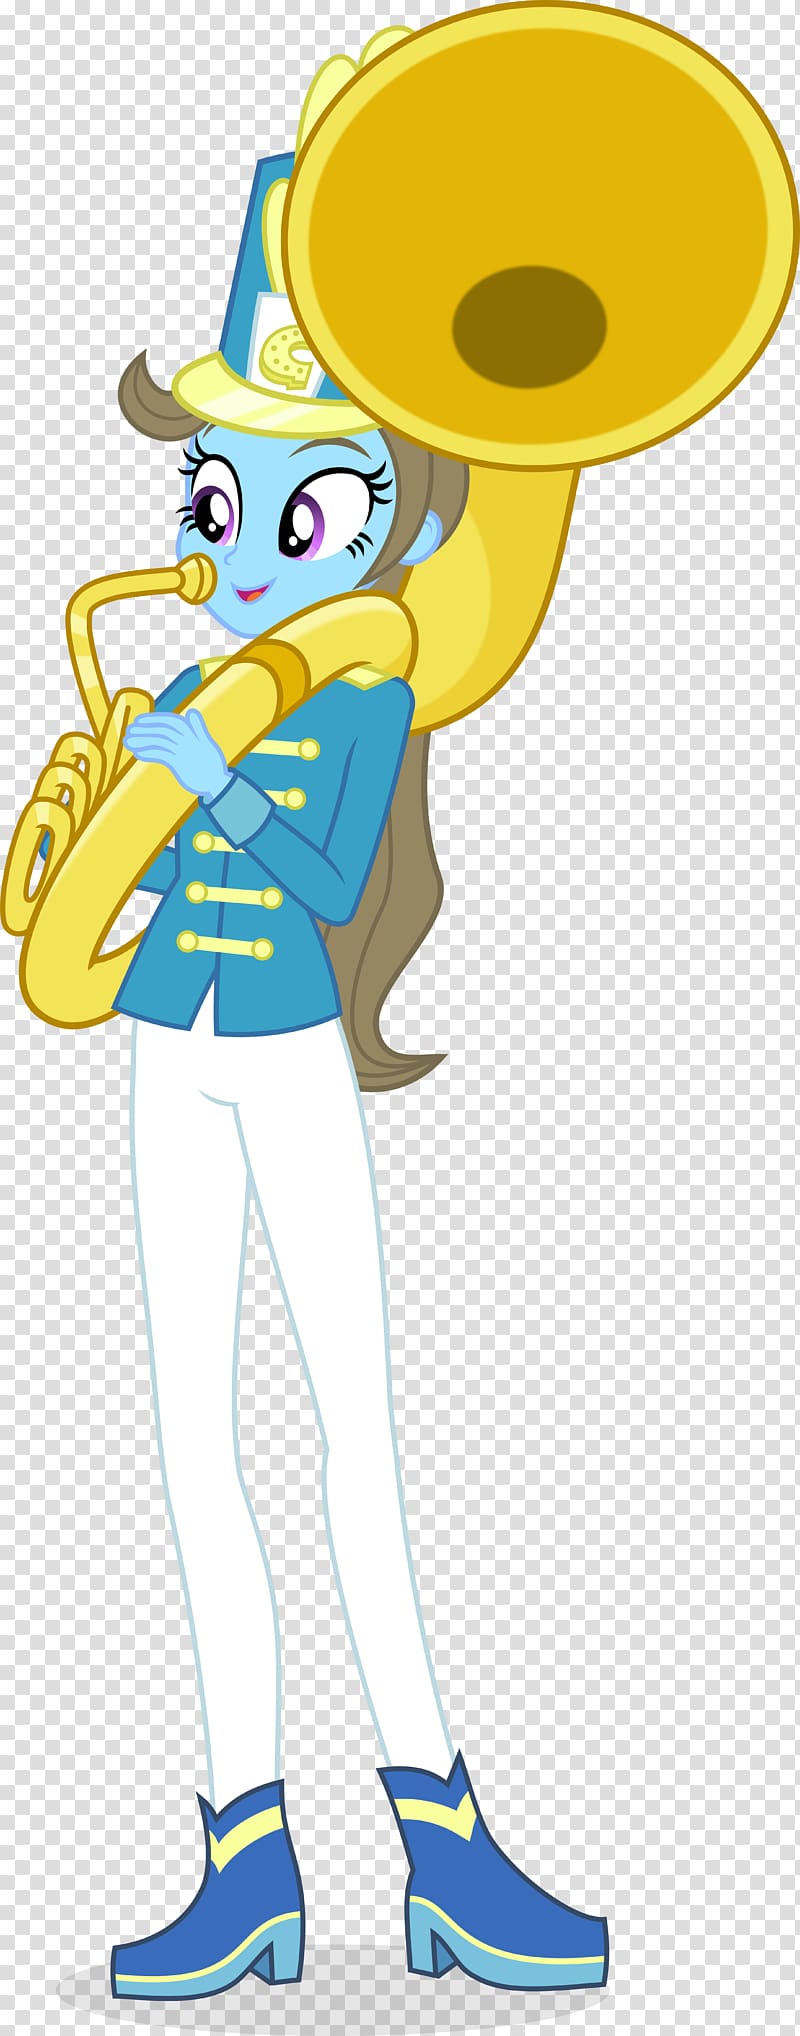 Marching band Fan art Musical ensemble Sousaphone, others transparent background PNG clipart